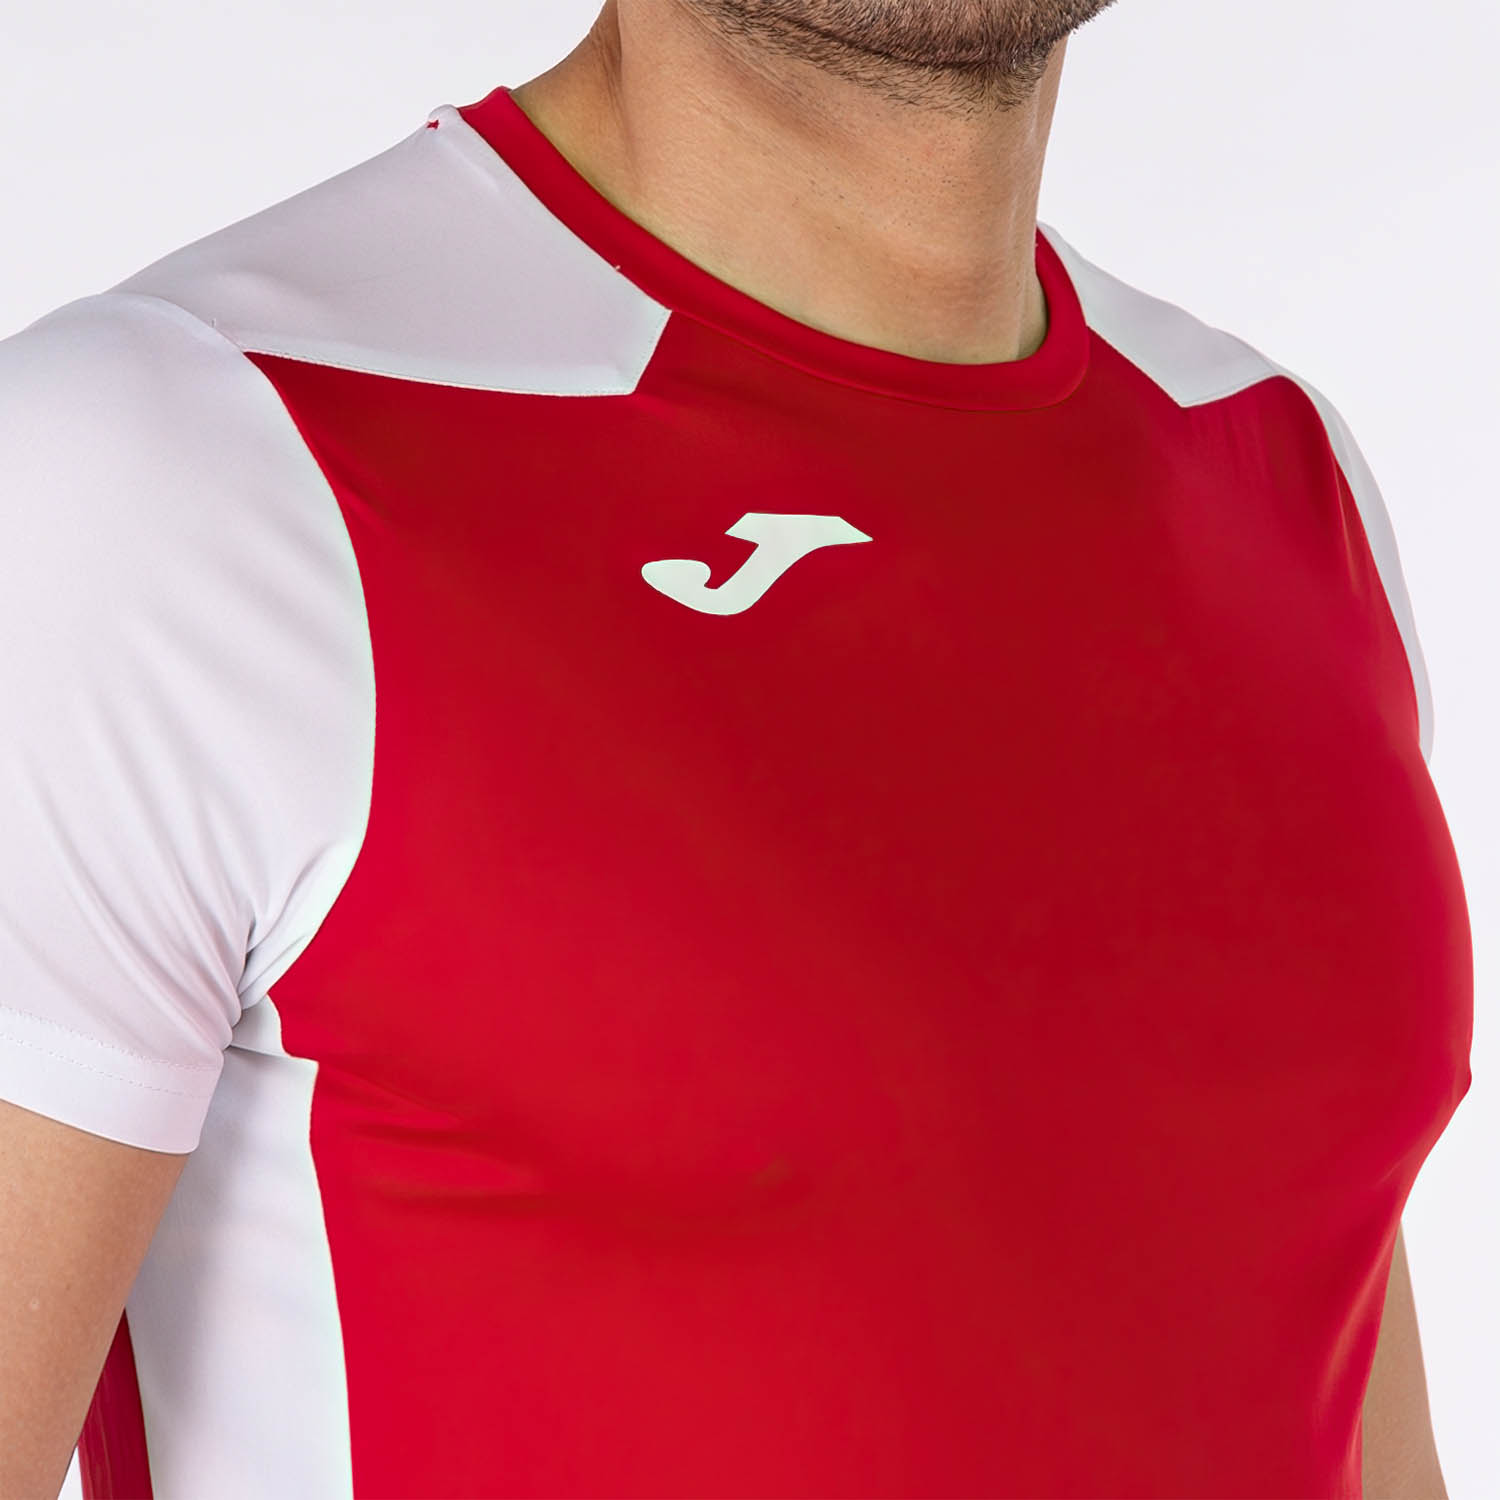 Joma Record II T-Shirt - Red/White